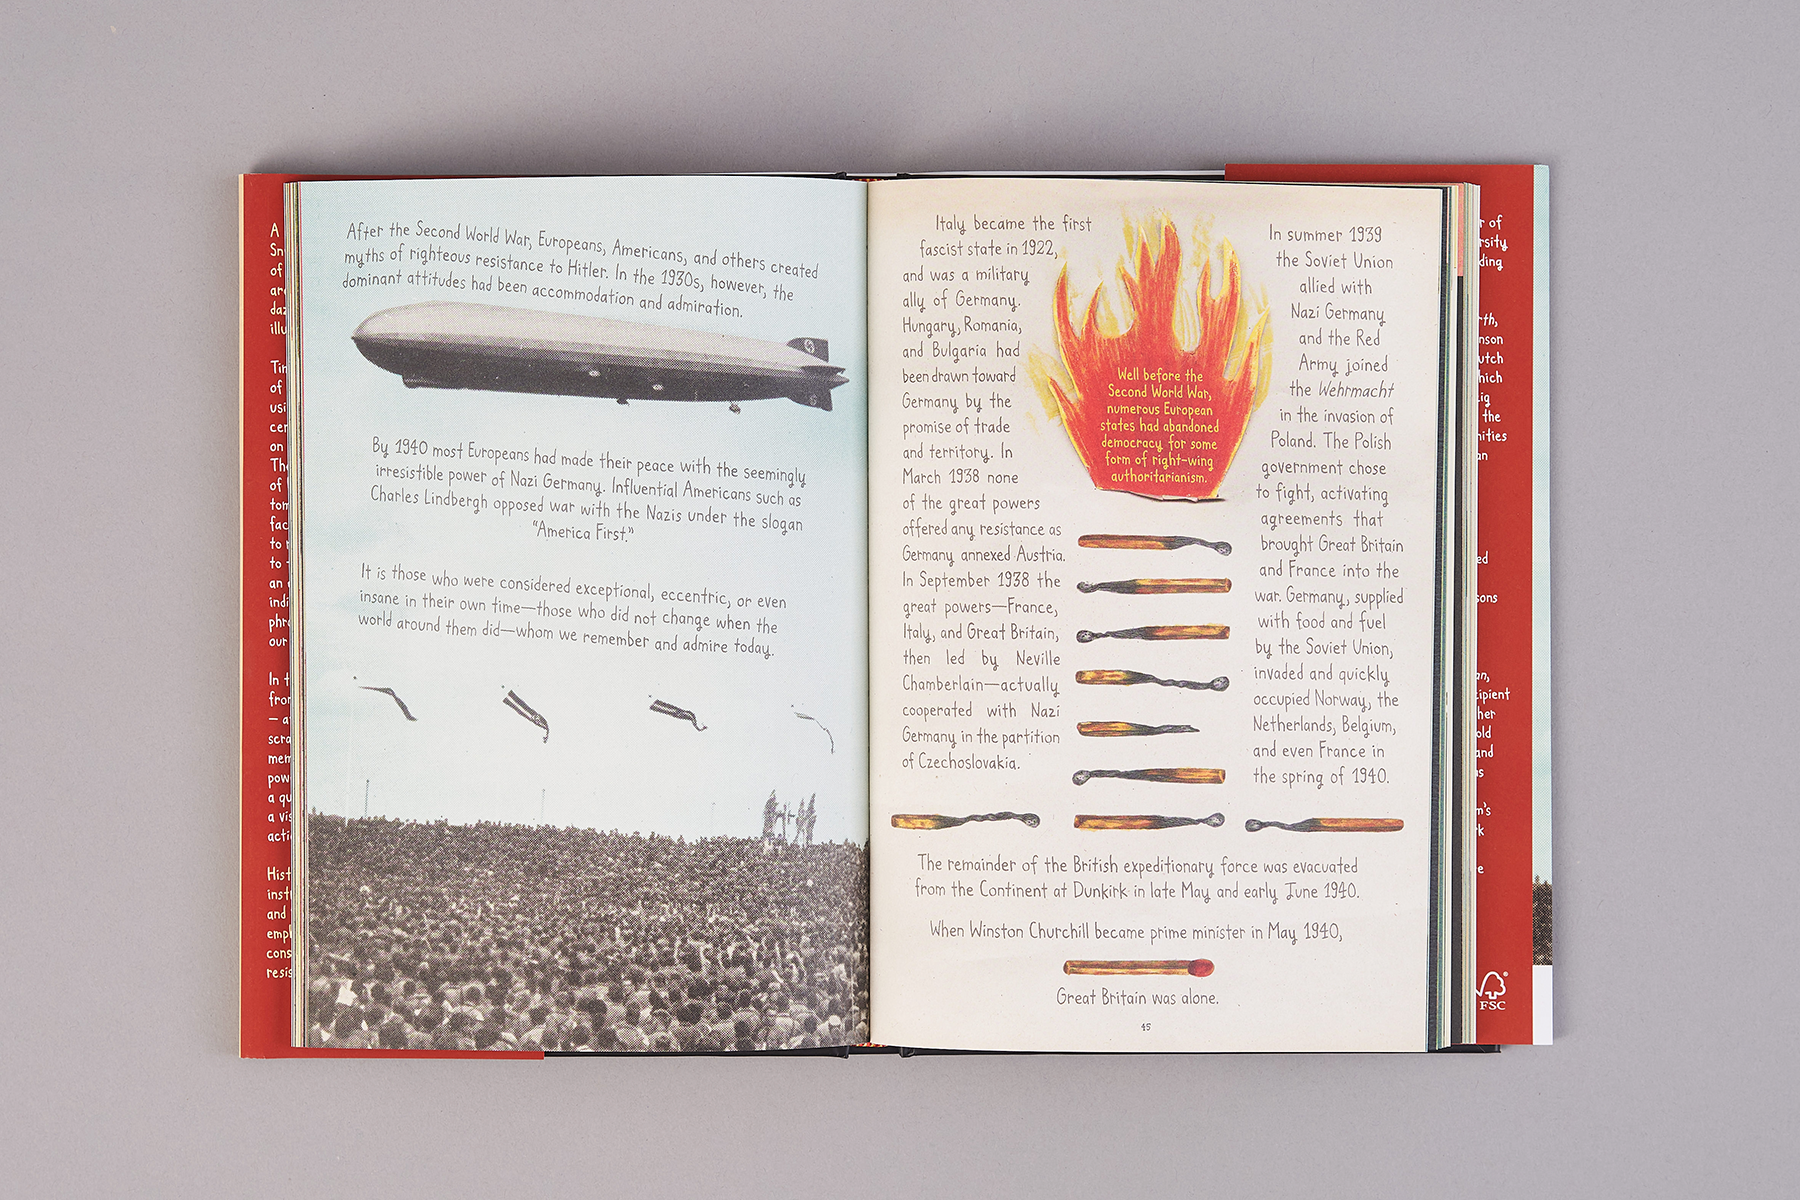 Nora Krug's art brings the new edition of On Tyranny to life